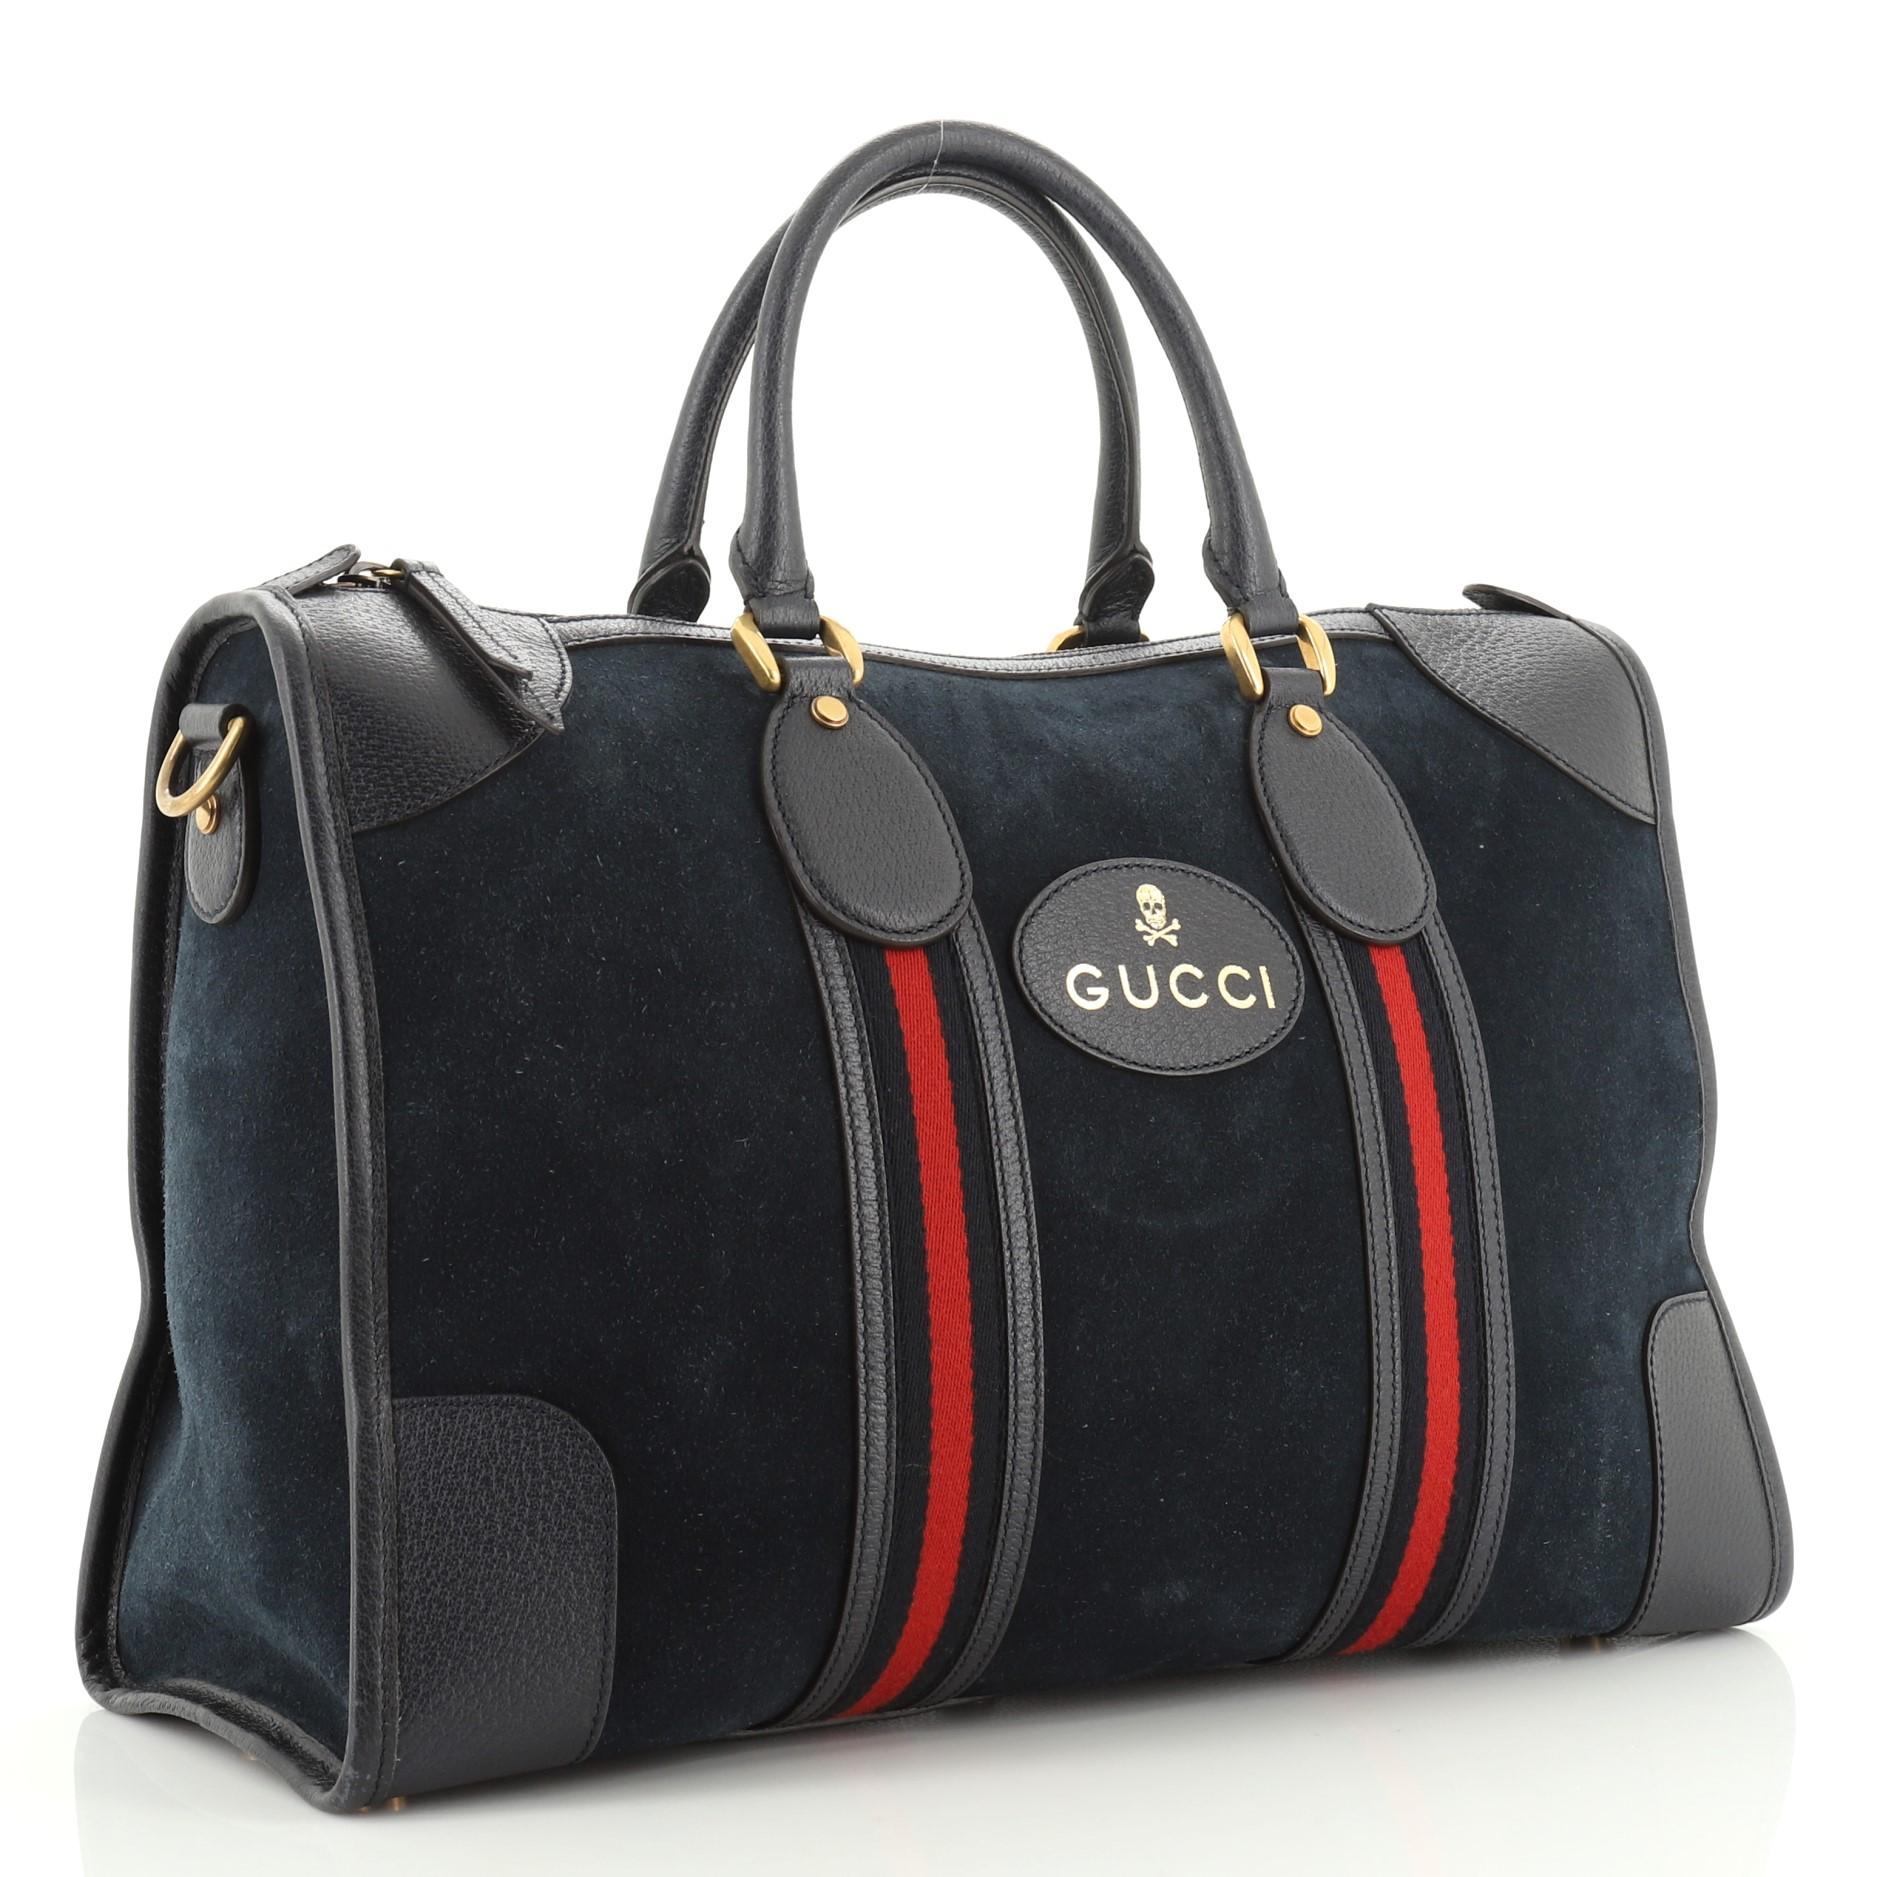 This Gucci Web Convertible Duffle Bag Suede Medium, crafted from blue suede, features dual rolled handles, Web detailing and aged gold-tone hardware. Its zip closure opens to a neutral fabric interior with zip and slip pockets.

Estimated Retail